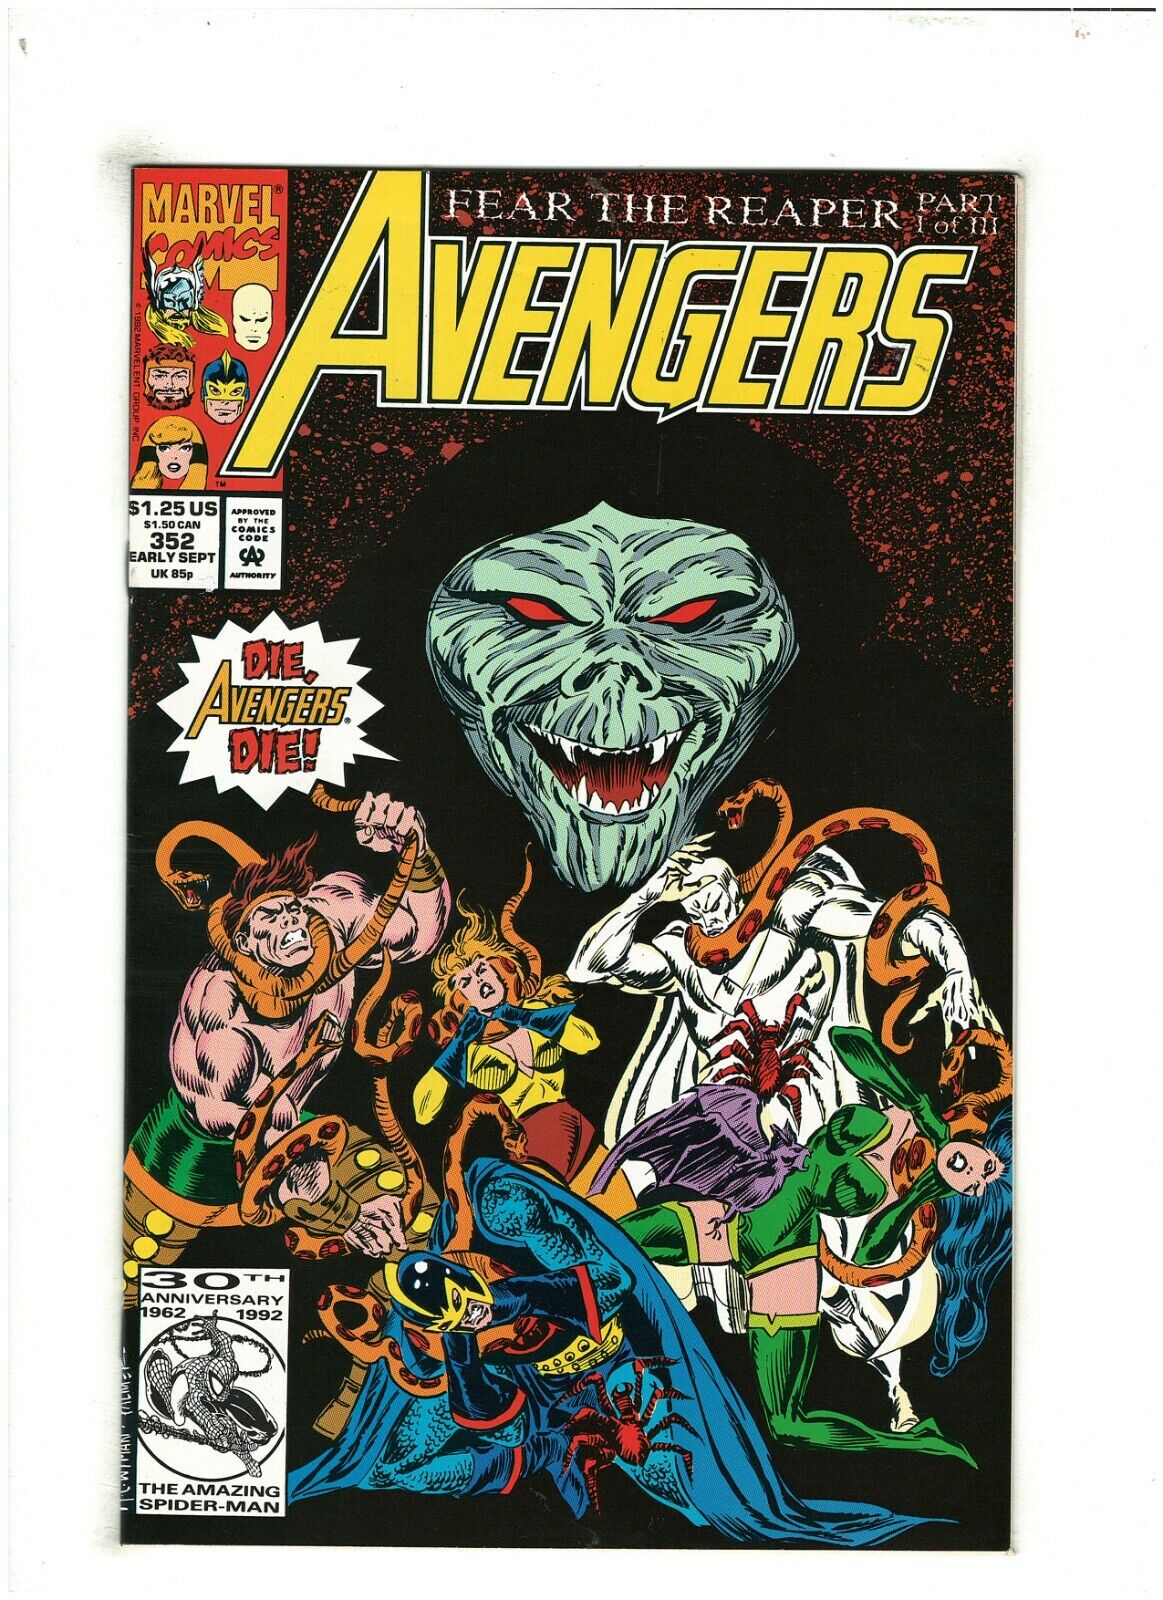 Avengers #352 VF/NM 9.0 Marvel Comics 1992 Fear the Repear pt.1